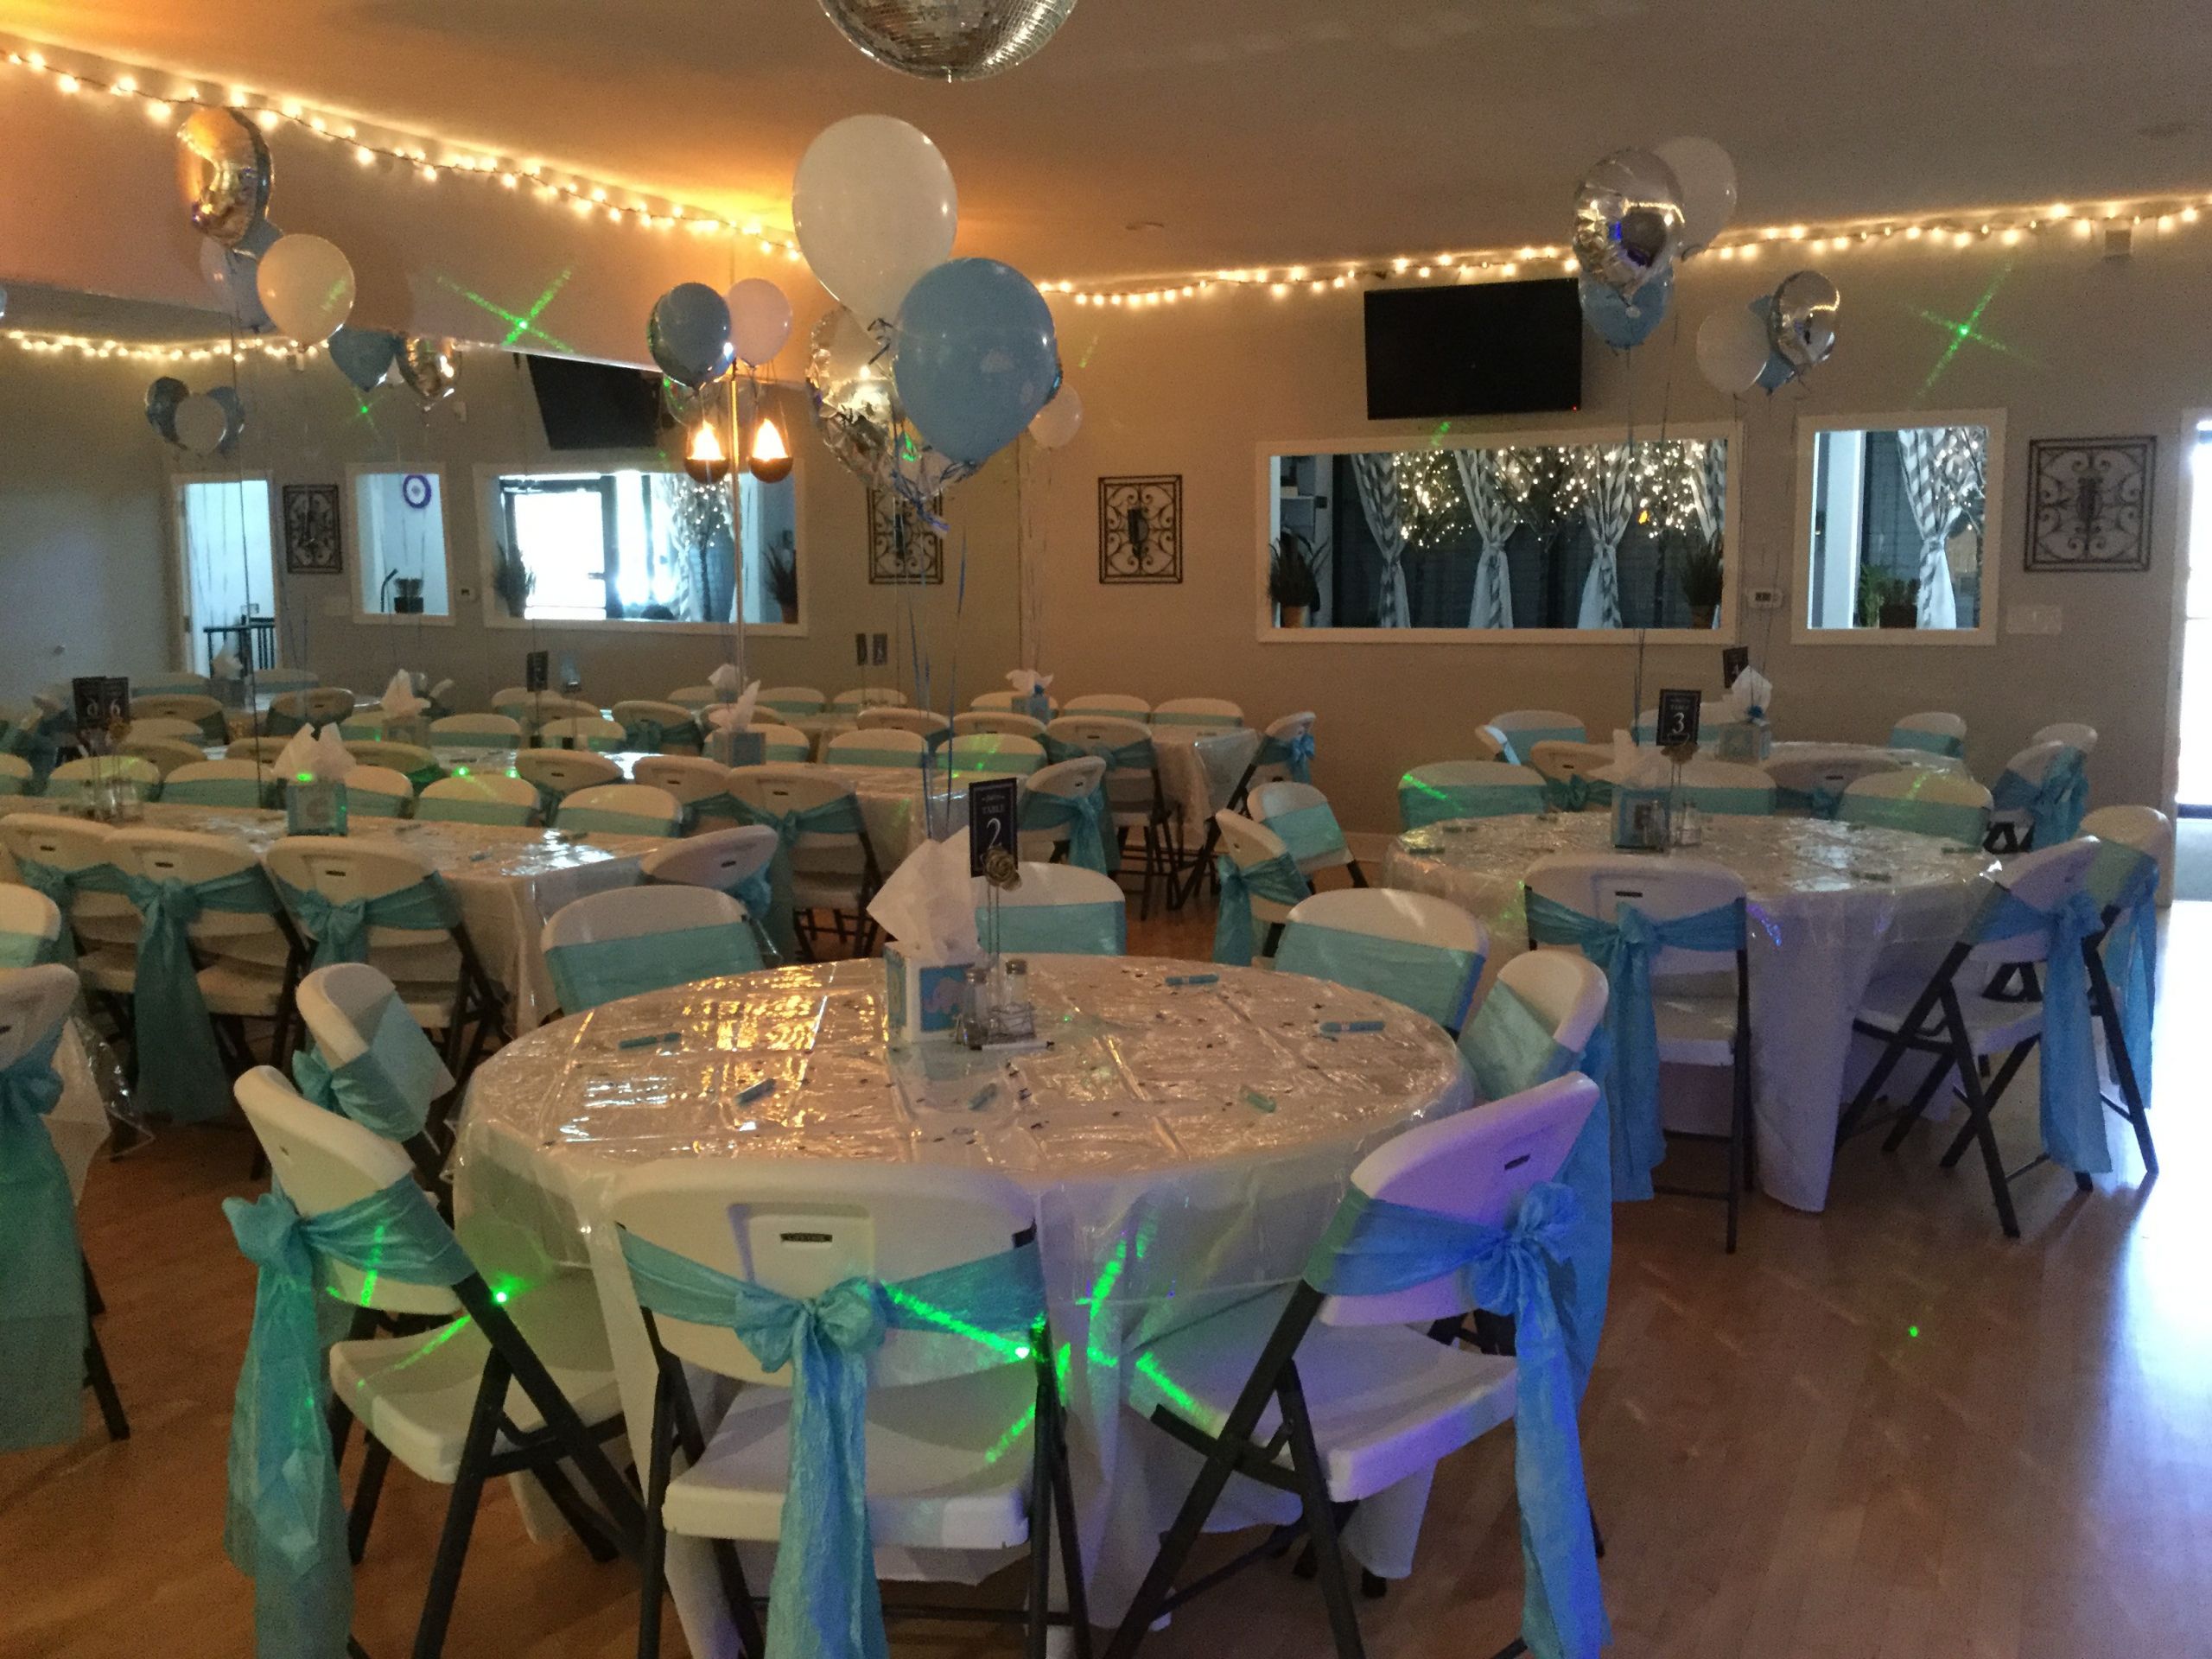 Party Room Rentals For Baby Shower
 Susan s House of Magic